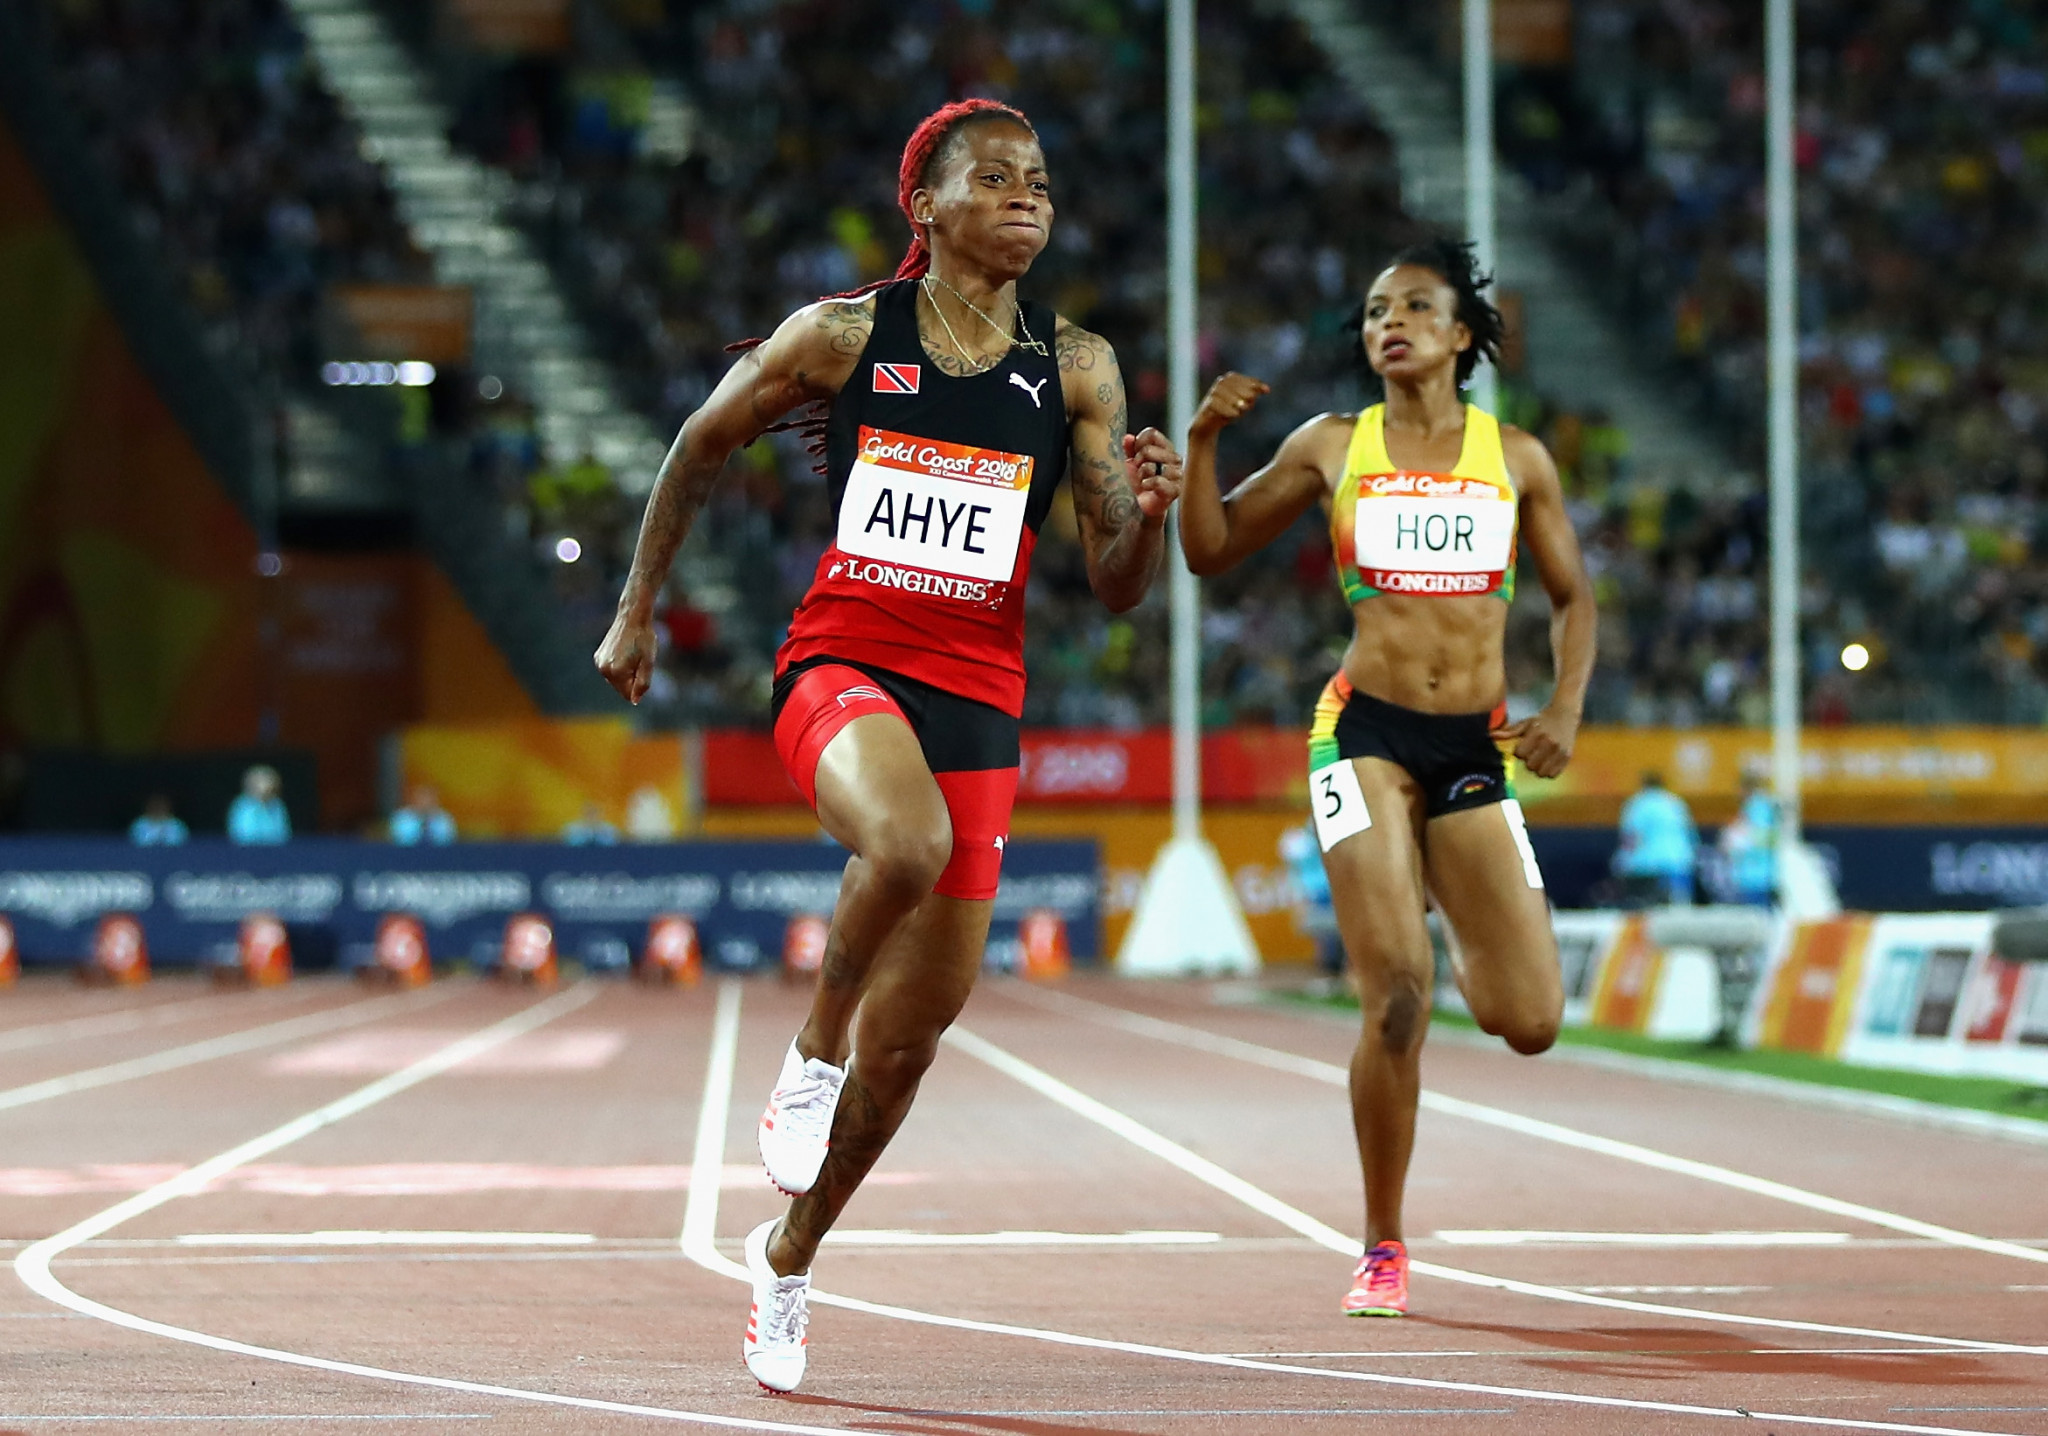 Trinidad and Tobago's Michelle-Lee Ahye won the women's 100m to become her country's first-ever female Commonwealth Games gold medallist and their first since Ato Boldo won the men's event at Kuala Lumpur 1998 ©Getty Images